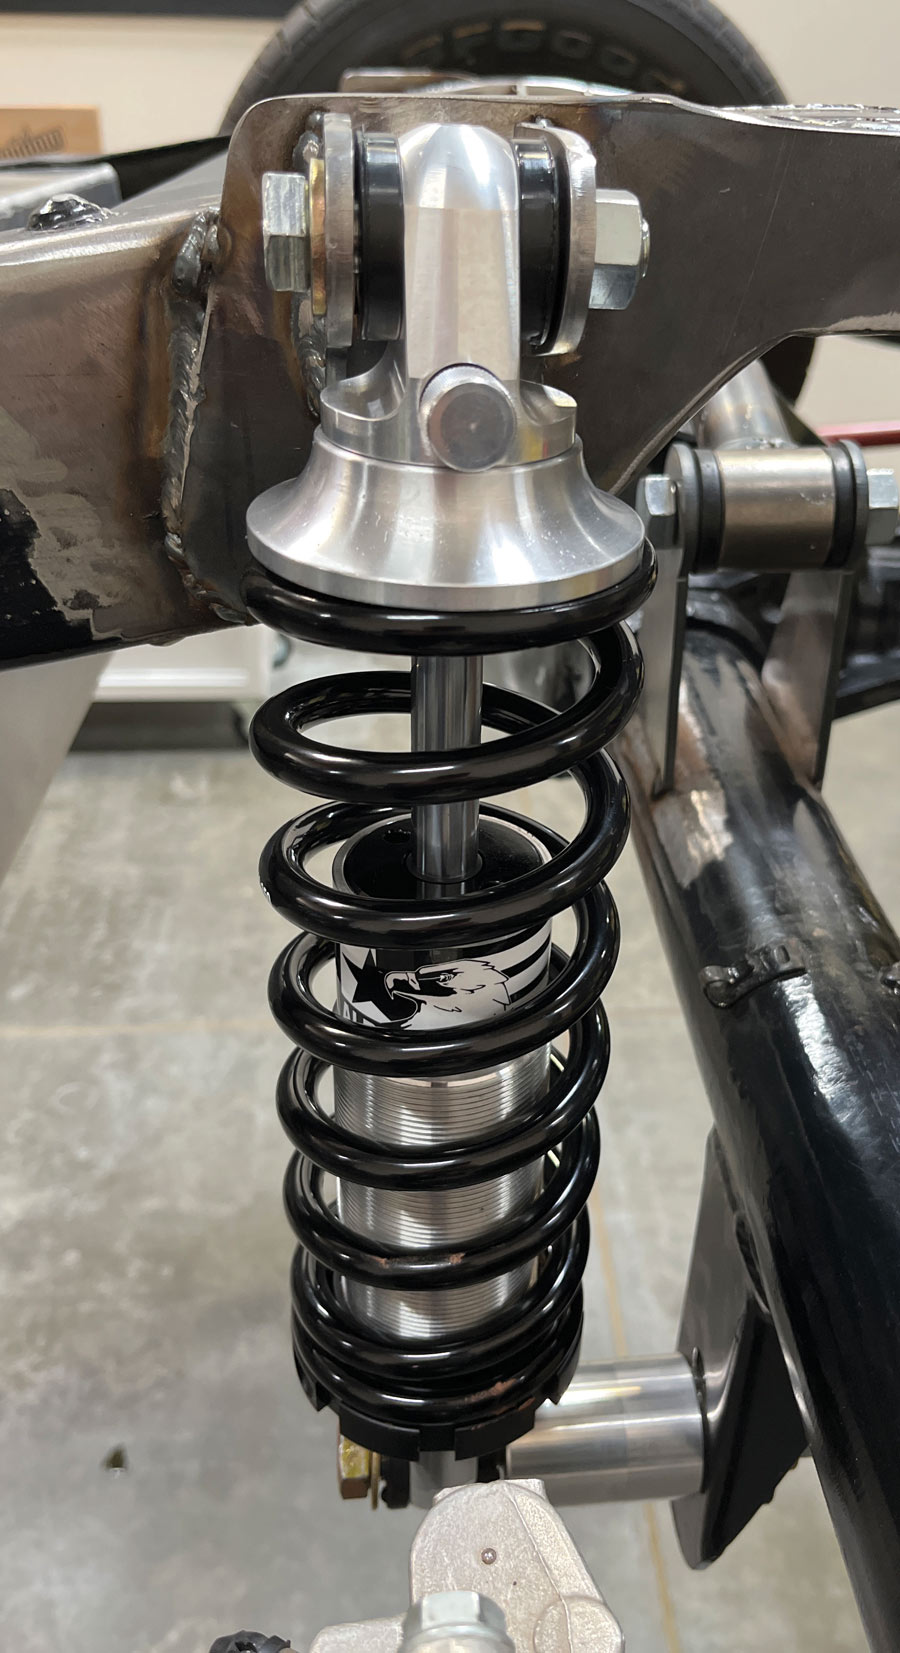 Coilover mounting bolts should always be front to rear to allow articulation during suspension movement